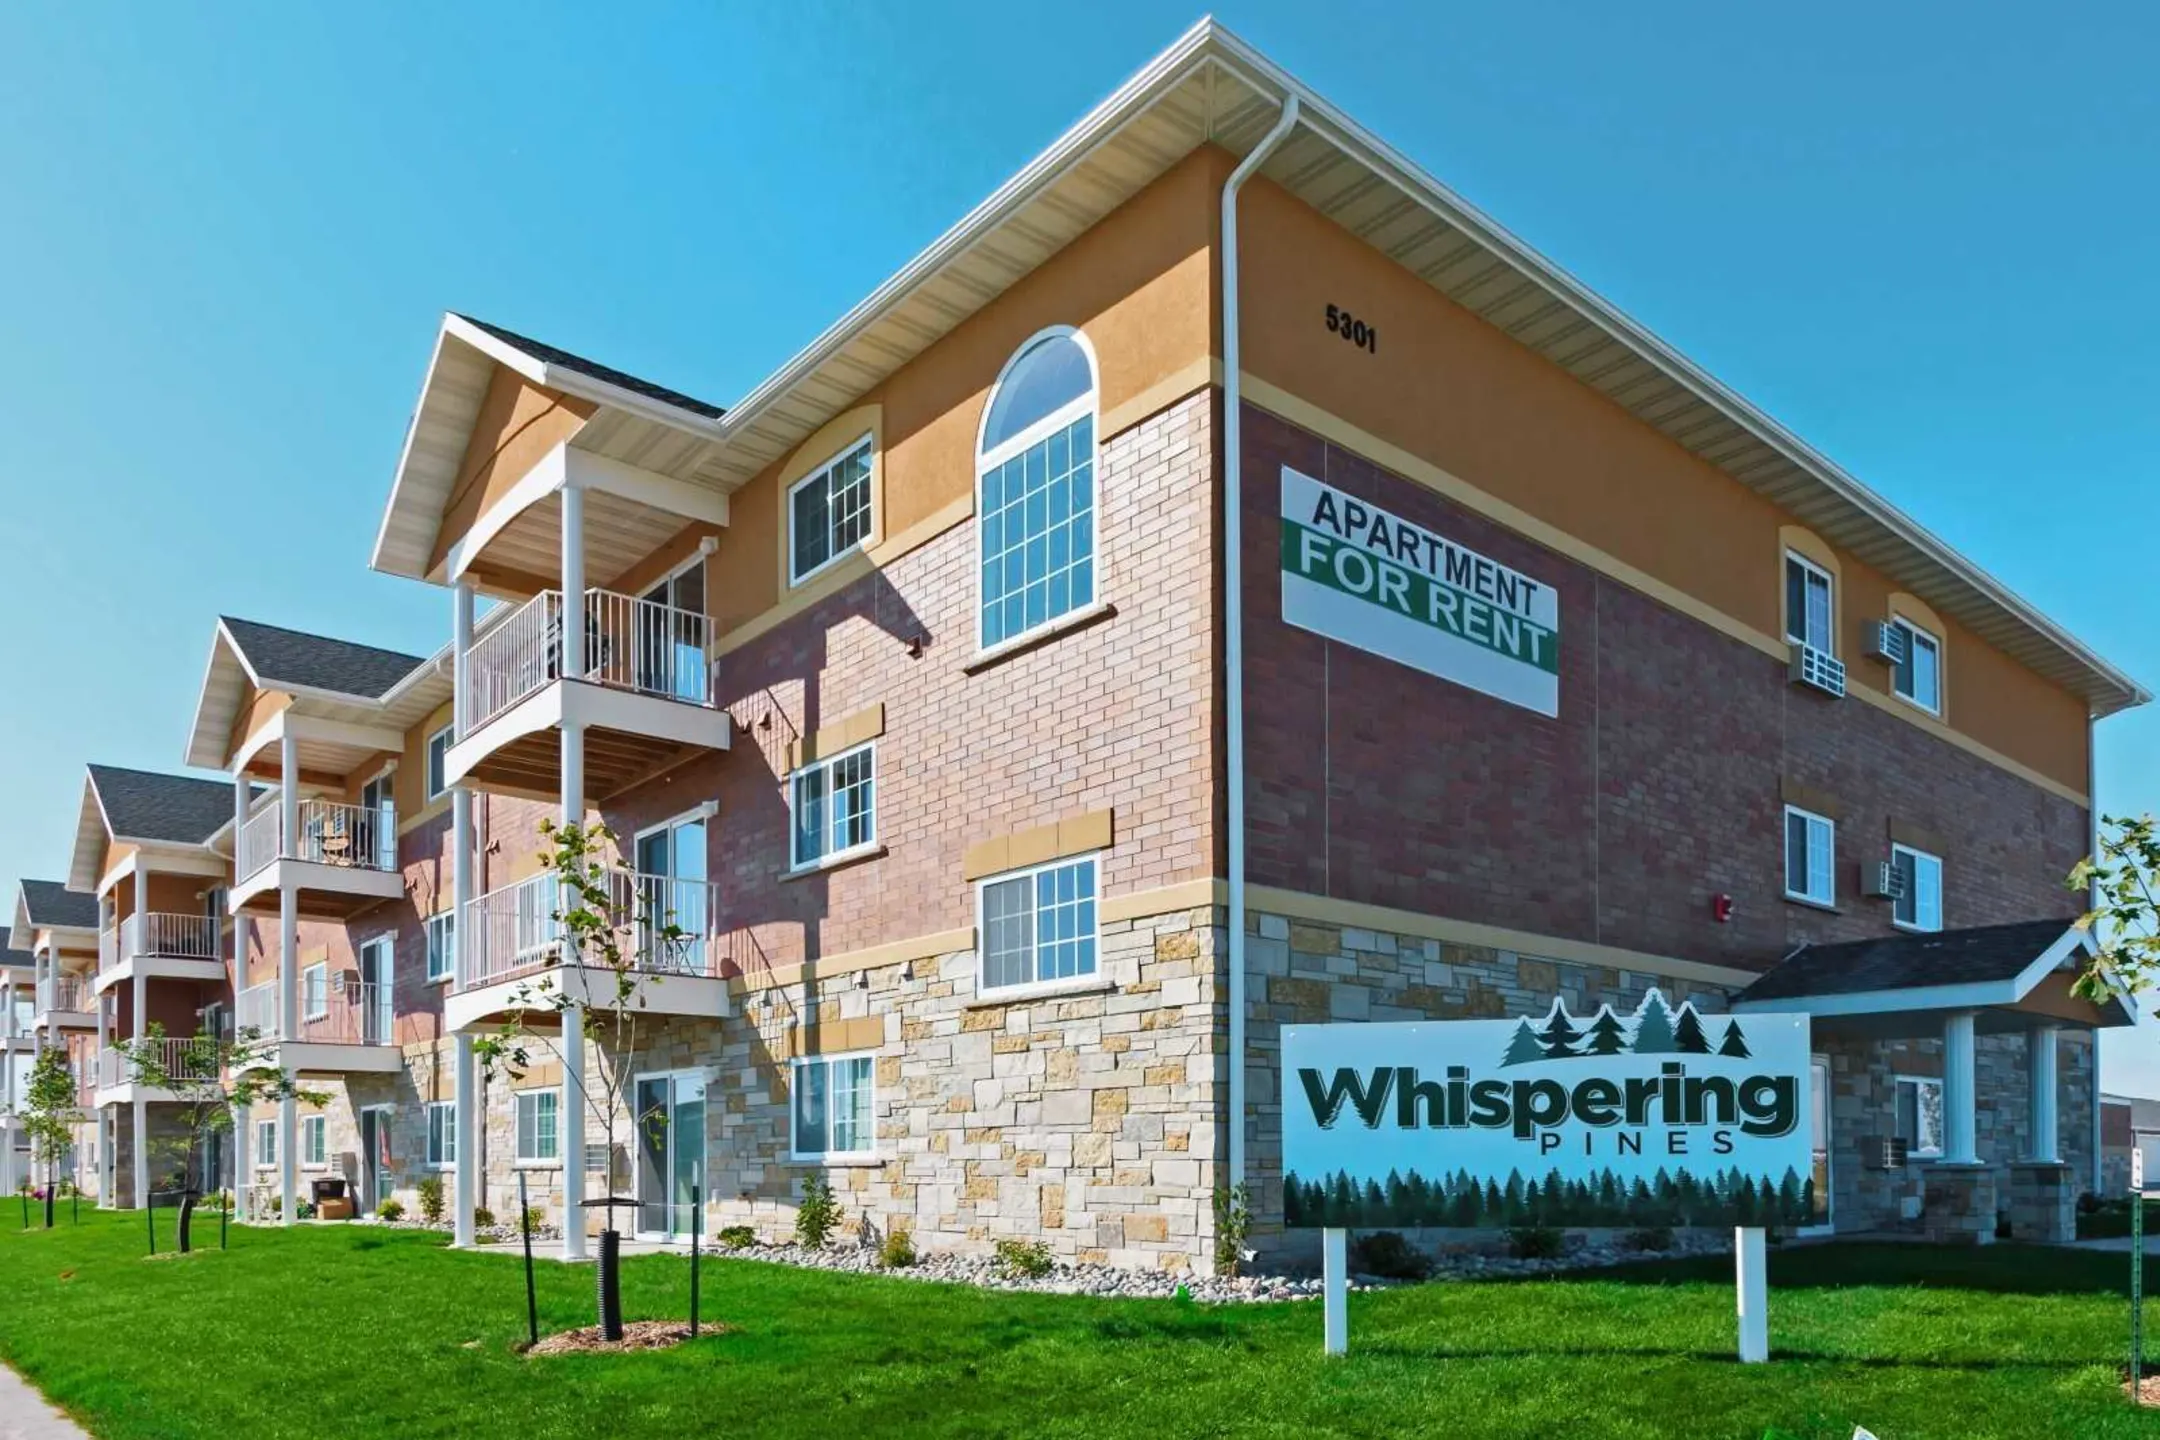 Building - Whispering Pines - Fargo, ND